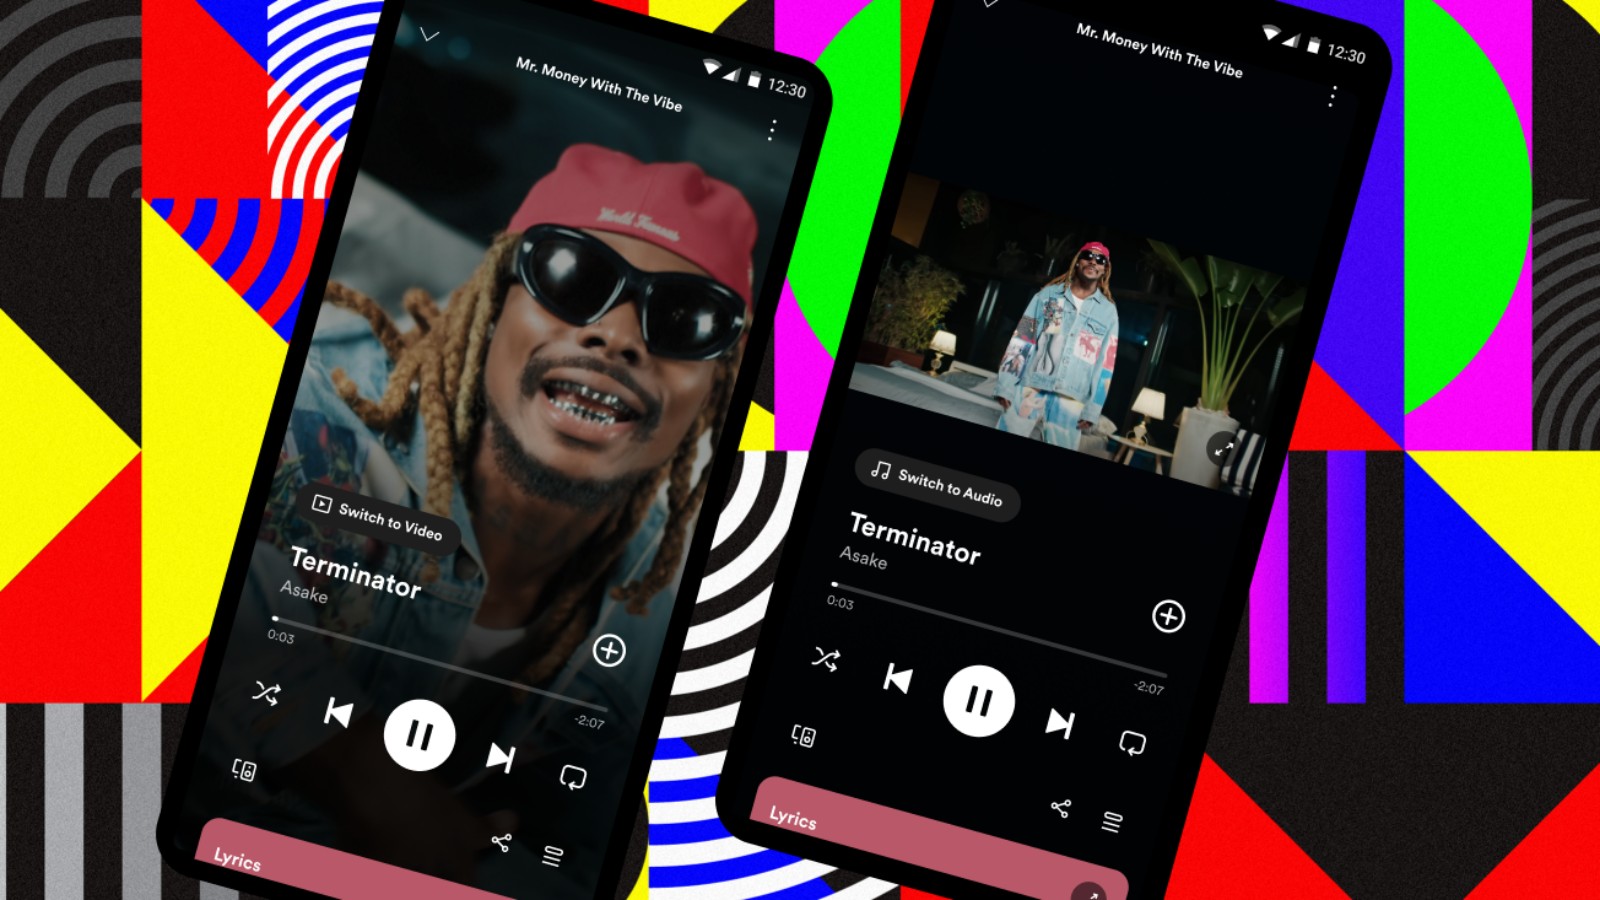 Spotify experimenting with a new remix feature inspired by TikTok